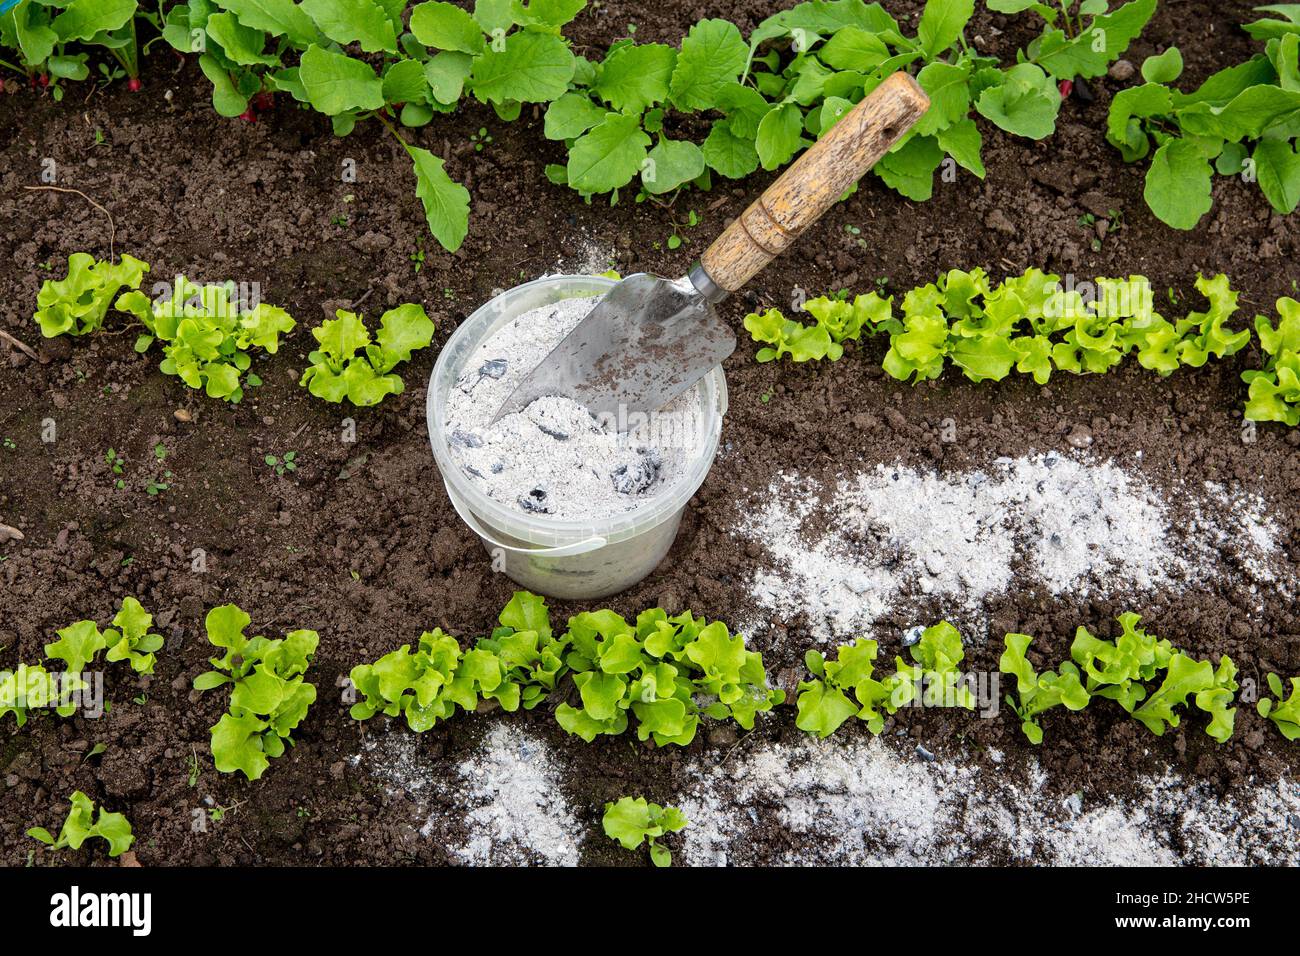 Using wood burn ash from small garden shovel between lettuce herbs for non-toxic organic insect repellent on salad in vegetable garden. Stock Photo